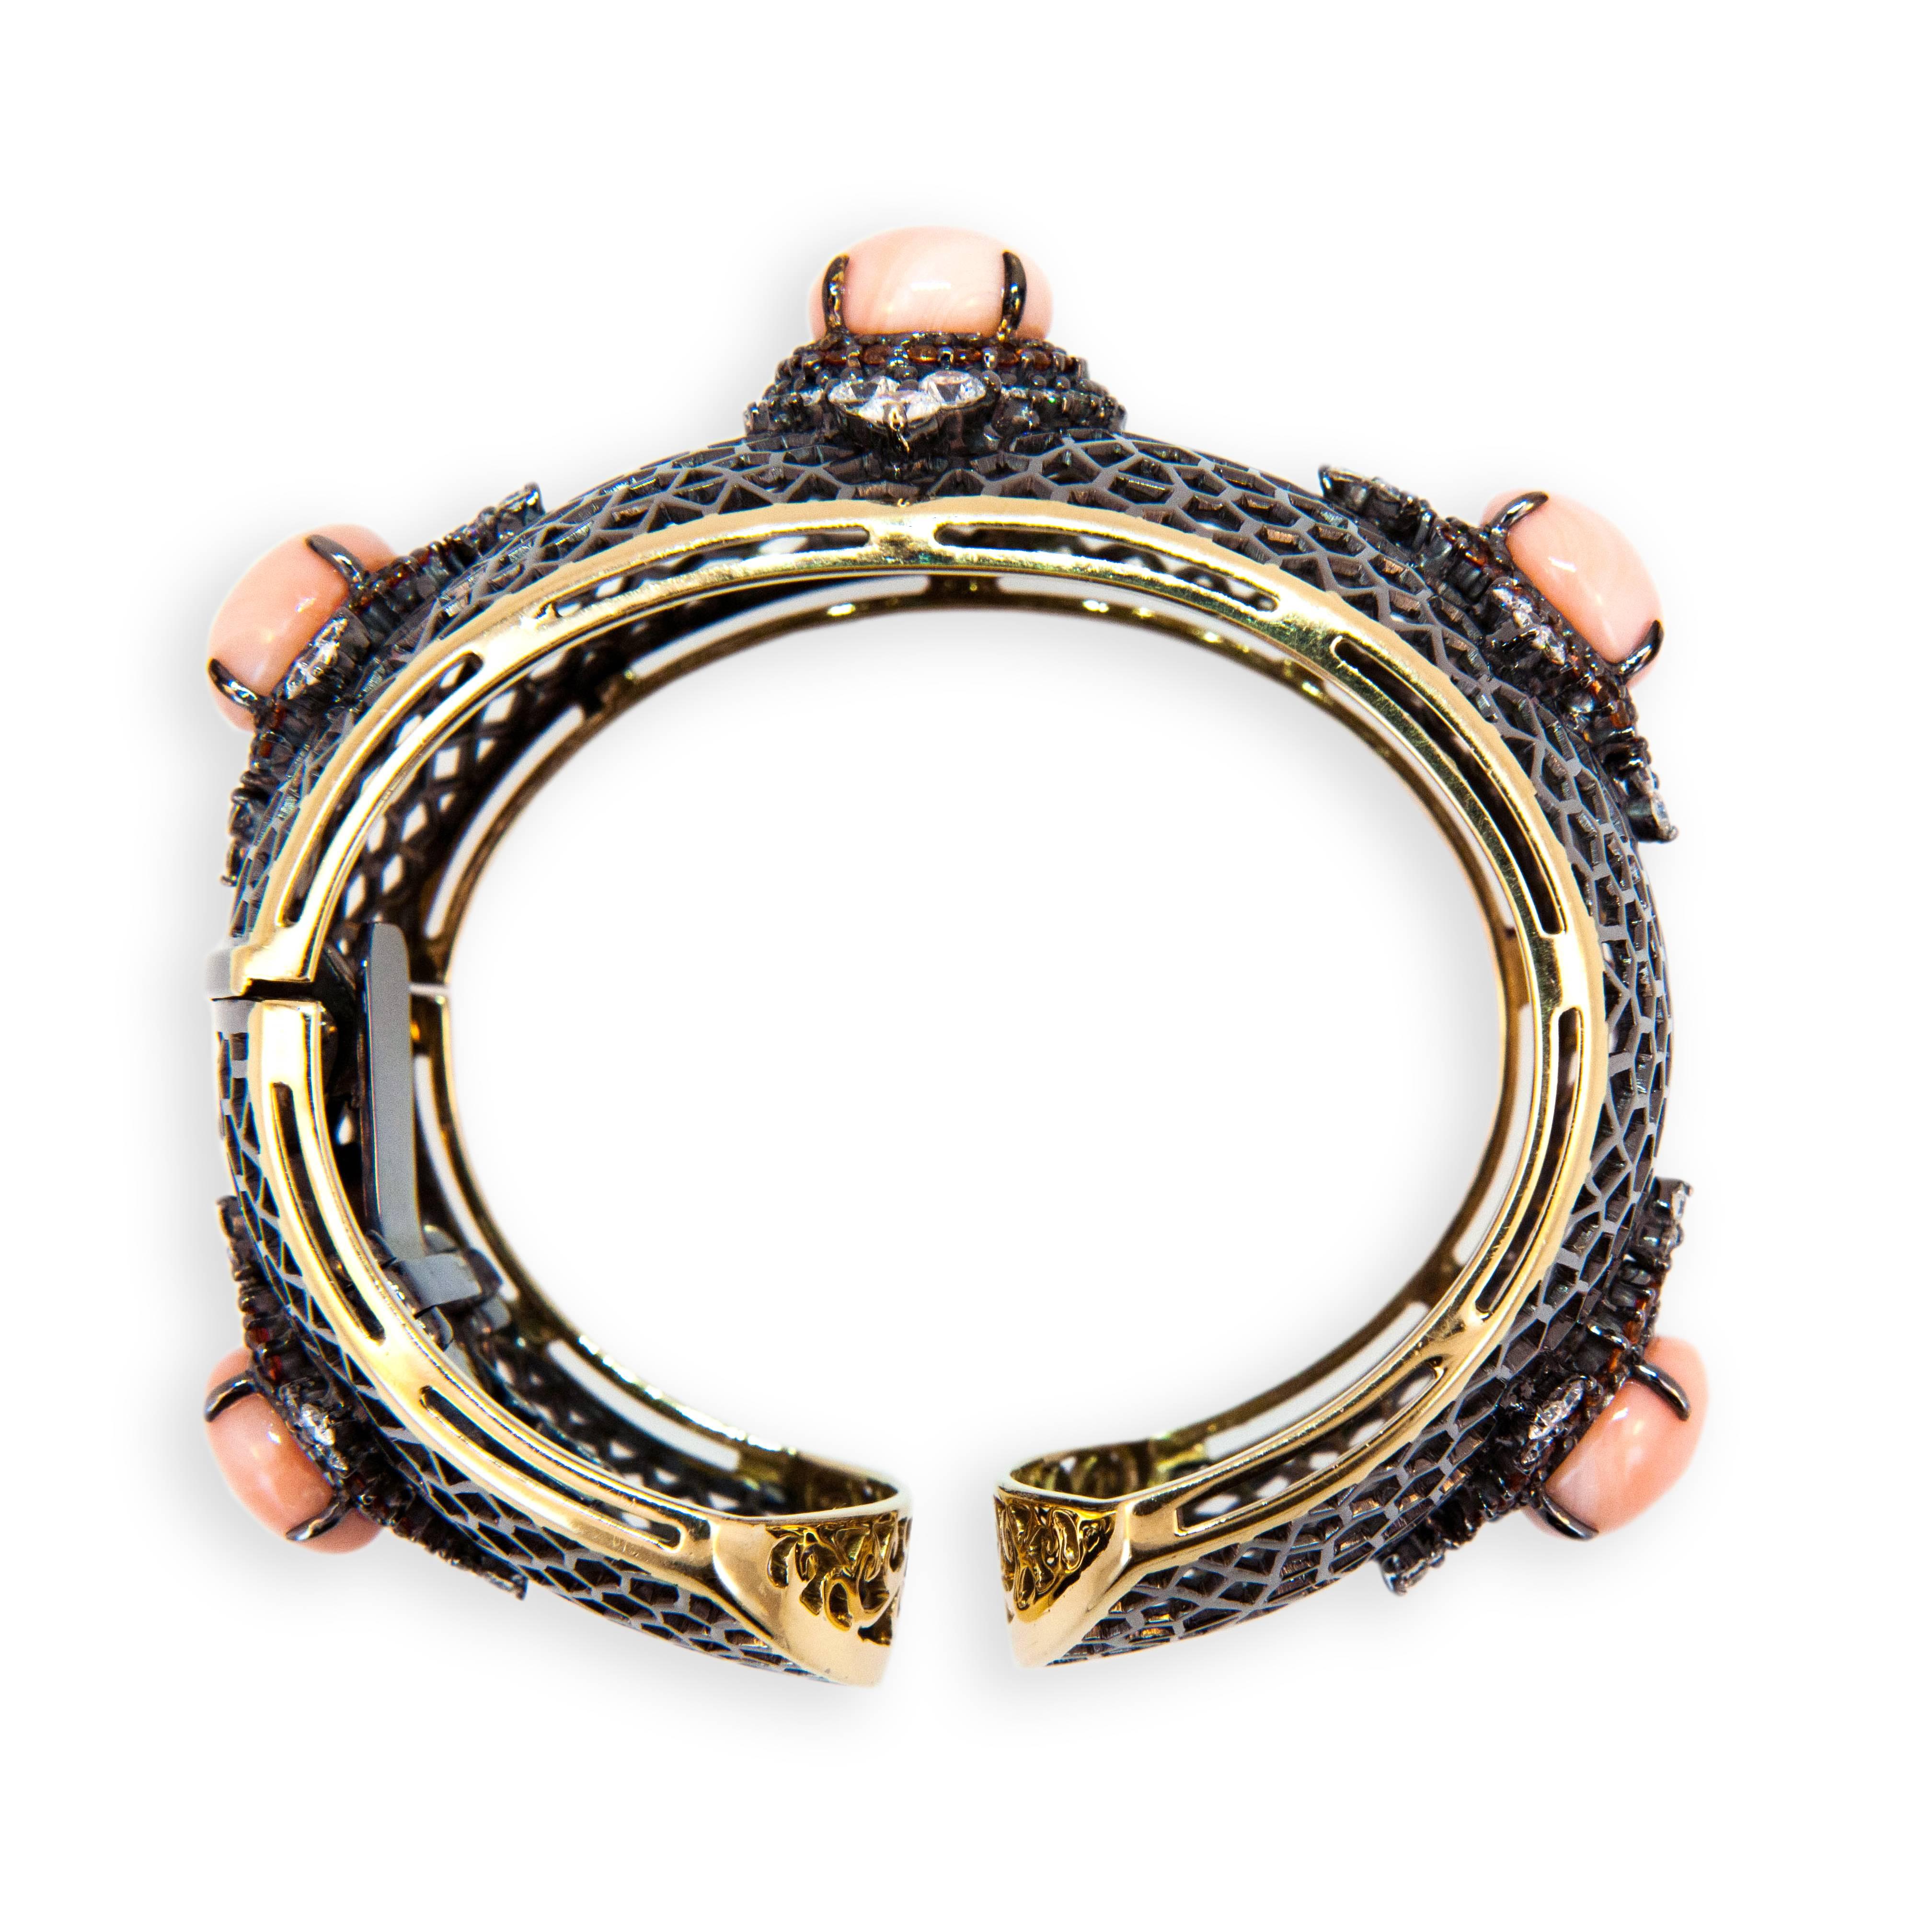 18 karat yellow gold blackened hinged cuff bracelet open web design with five 12.2-12.5 mm Angel Skin Coral Cabs 40.24 carats total weight. 110 Orange Sapphires 3.67 carats total weight. 83 full-cut diamonds 4.51 carats total weight.
